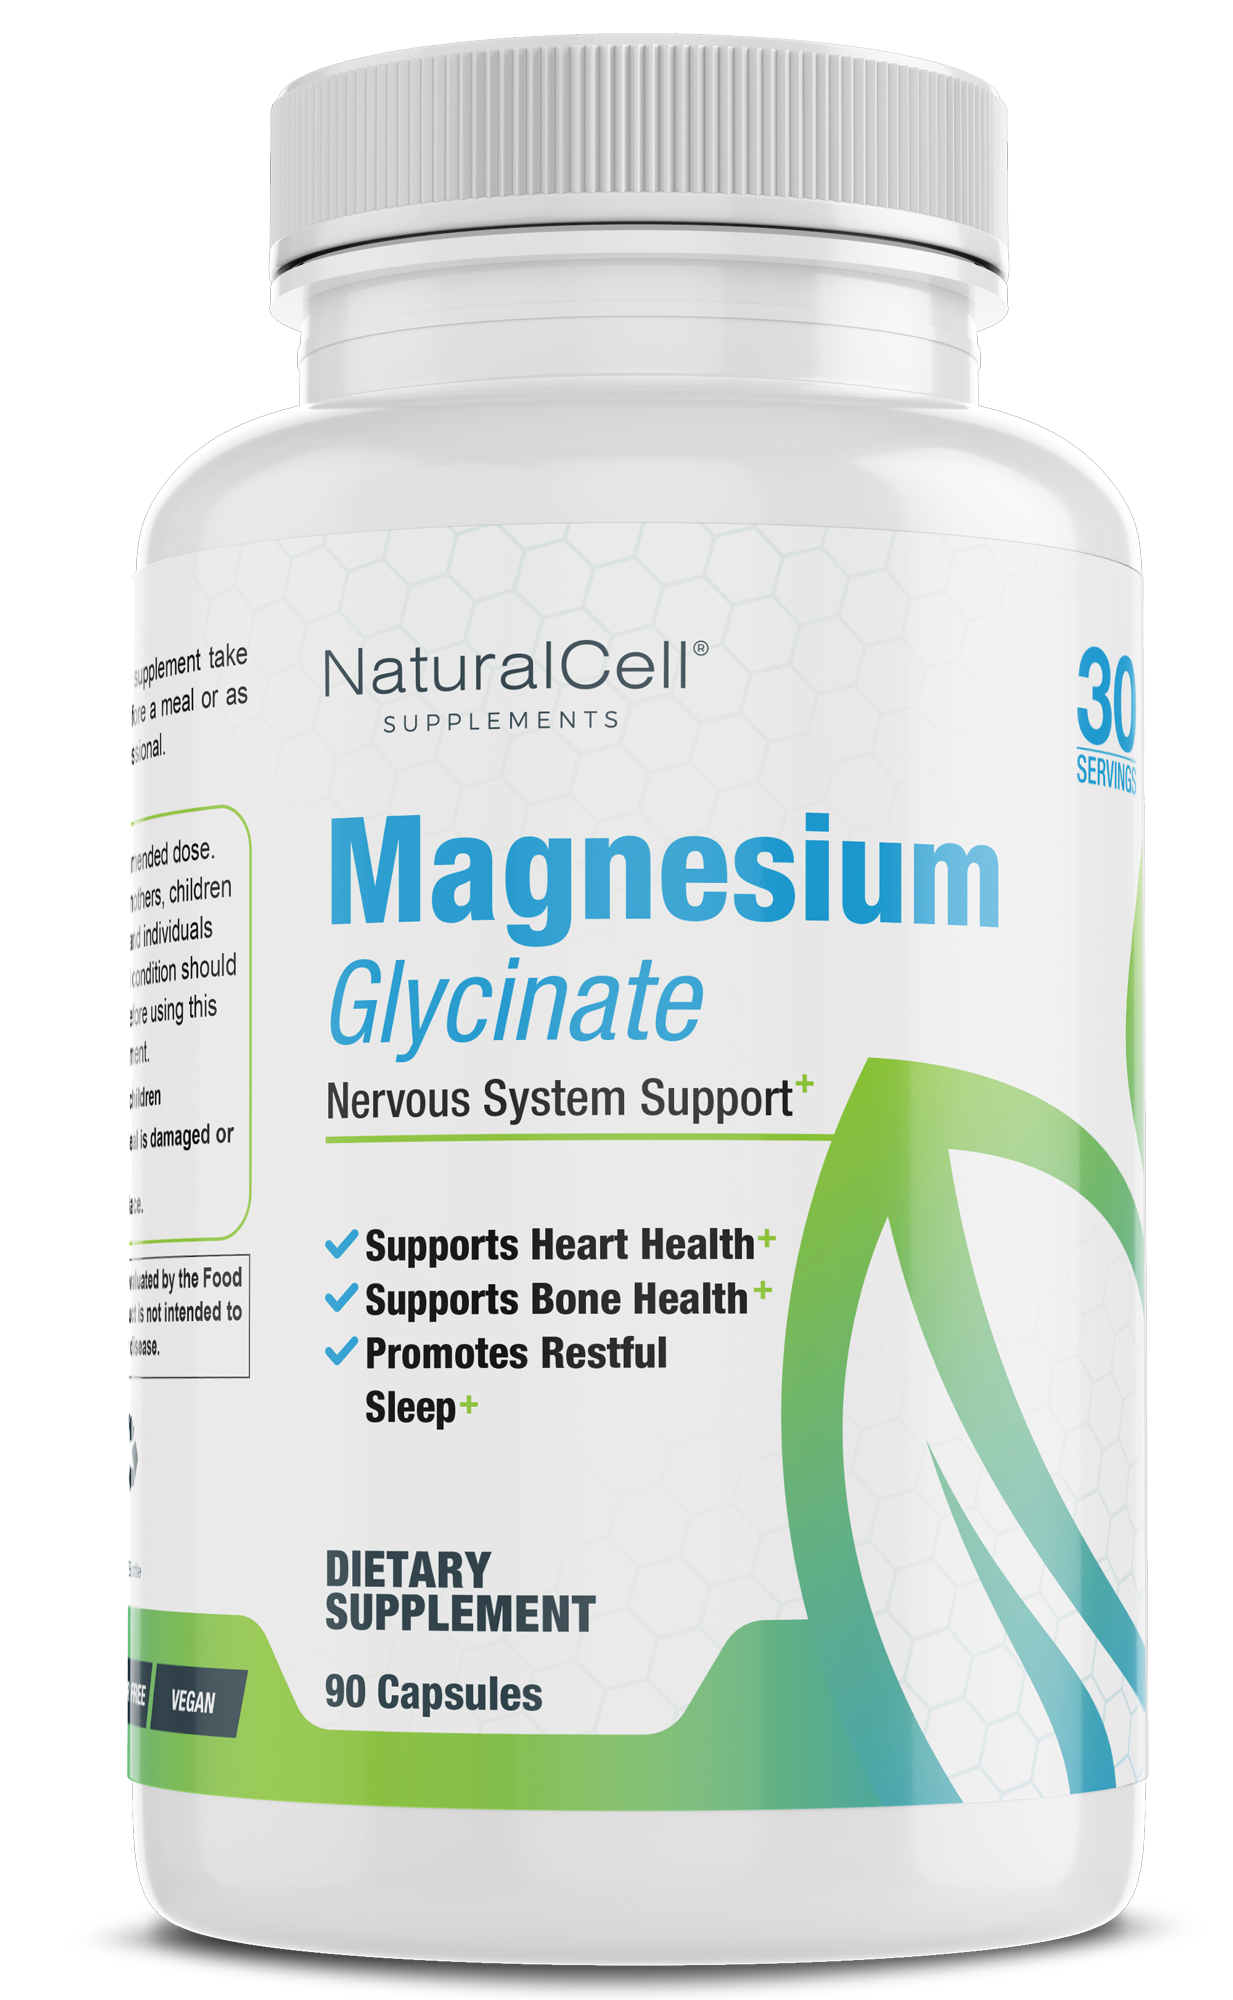 Magnesium Glycinate - Nervous System Support